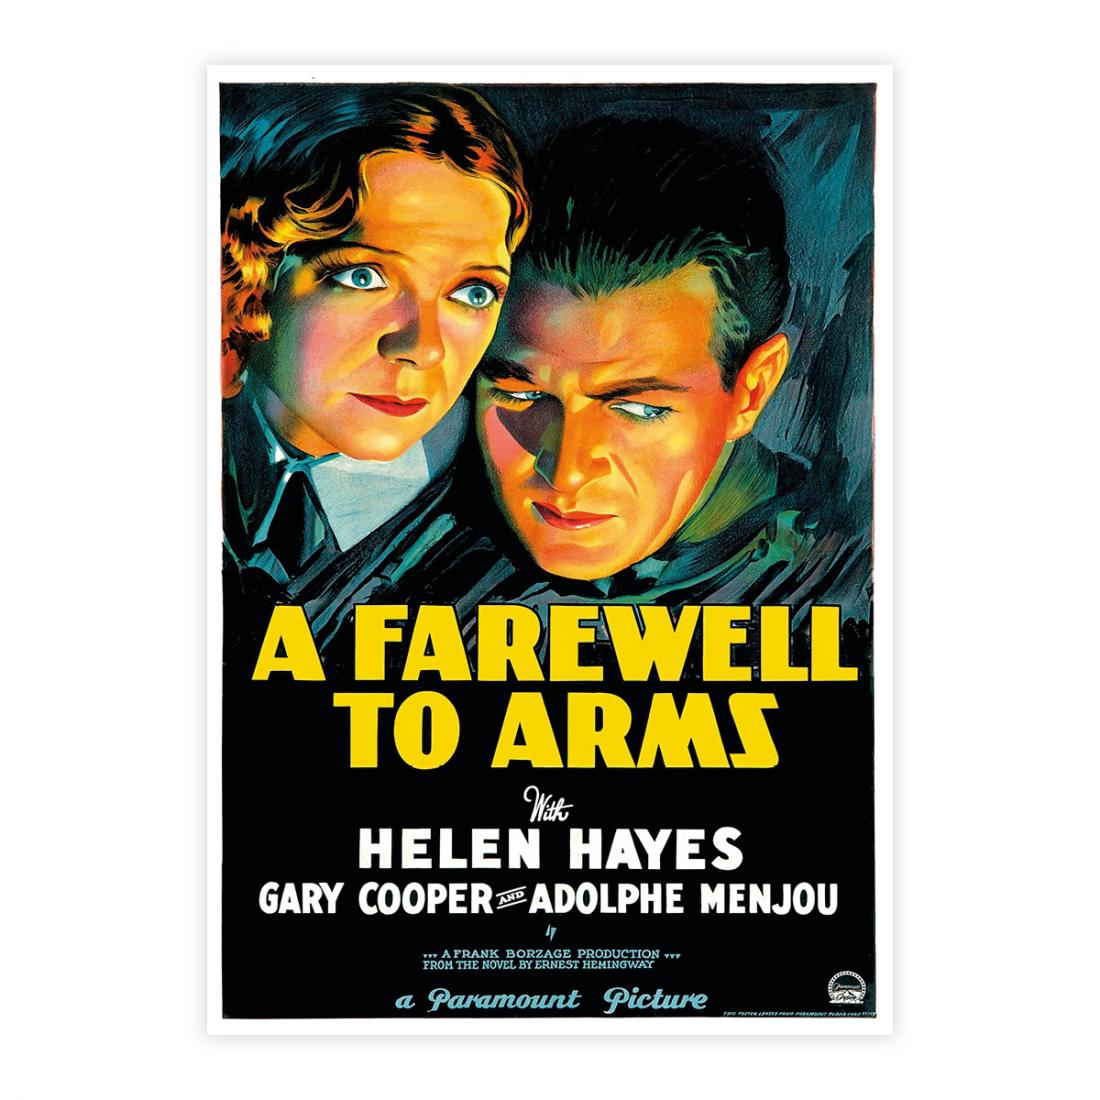 Frank Borzage - A Farewell to arms